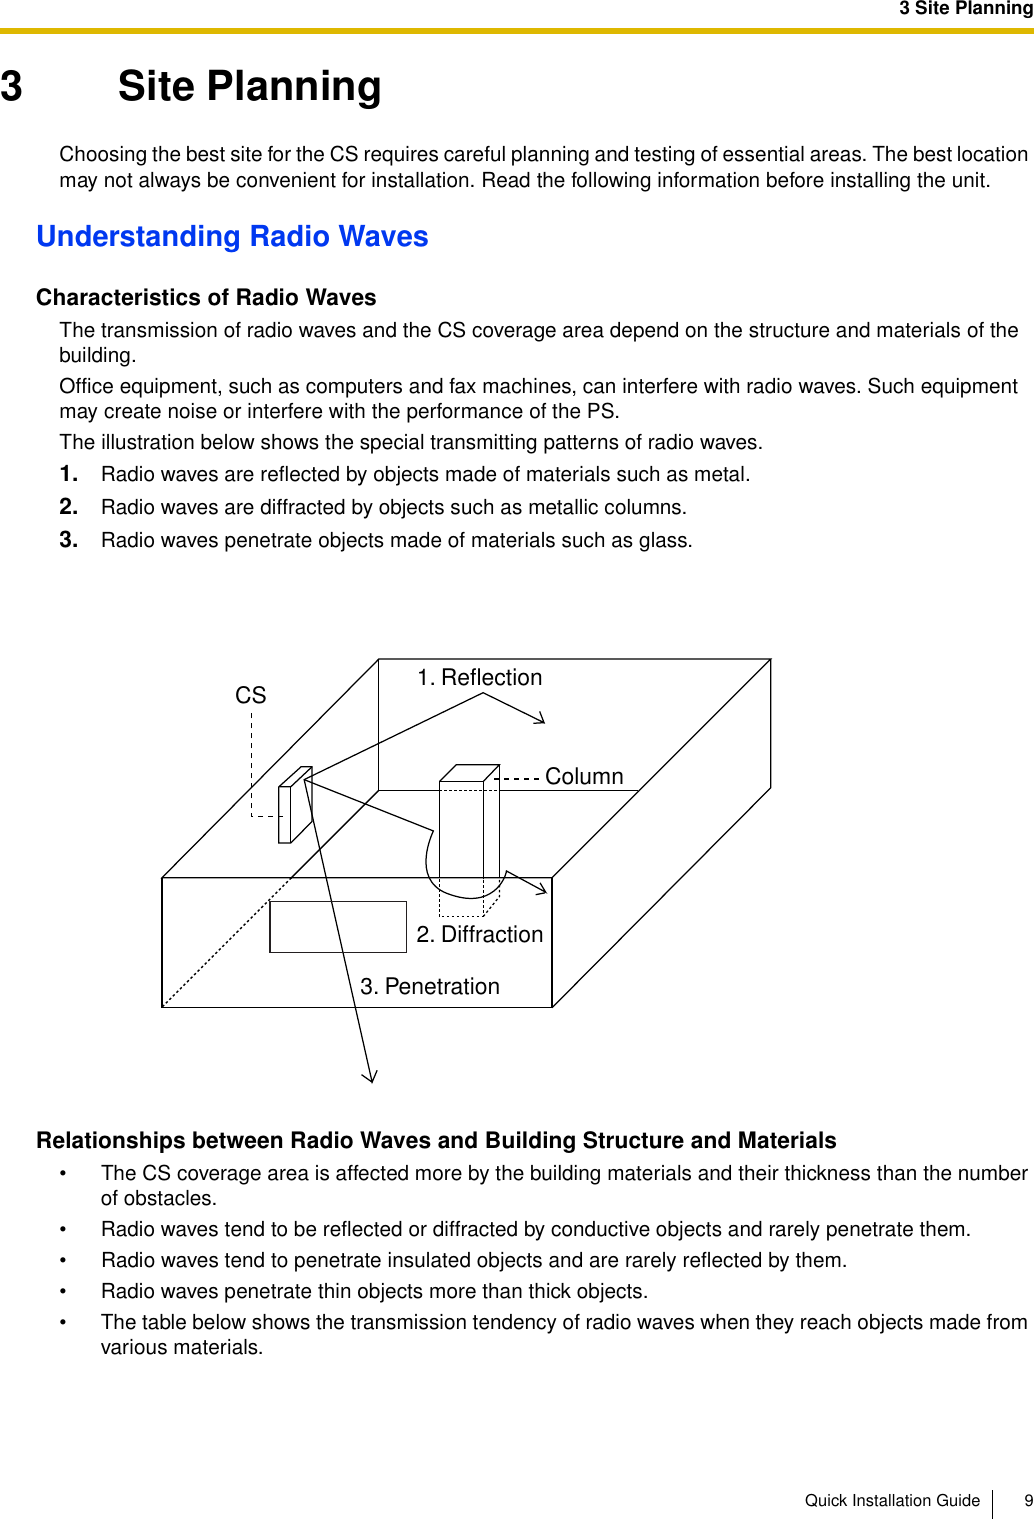 3 Site PlanningQuick Installation Guide 93 Site PlanningChoosing the best site for the CS requires careful planning and testing of essential areas. The best location may not always be convenient for installation. Read the following information before installing the unit.Understanding Radio WavesCharacteristics of Radio WavesThe transmission of radio waves and the CS coverage area depend on the structure and materials of the building.Office equipment, such as computers and fax machines, can interfere with radio waves. Such equipment may create noise or interfere with the performance of the PS.The illustration below shows the special transmitting patterns of radio waves.1. Radio waves are reflected by objects made of materials such as metal.2. Radio waves are diffracted by objects such as metallic columns.3. Radio waves penetrate objects made of materials such as glass.Relationships between Radio Waves and Building Structure and Materials• The CS coverage area is affected more by the building materials and their thickness than the number of obstacles.• Radio waves tend to be reflected or diffracted by conductive objects and rarely penetrate them.• Radio waves tend to penetrate insulated objects and are rarely reflected by them.• Radio waves penetrate thin objects more than thick objects.• The table below shows the transmission tendency of radio waves when they reach objects made from various materials.CSColumn3. Penetration2. Diffraction1. Reflection